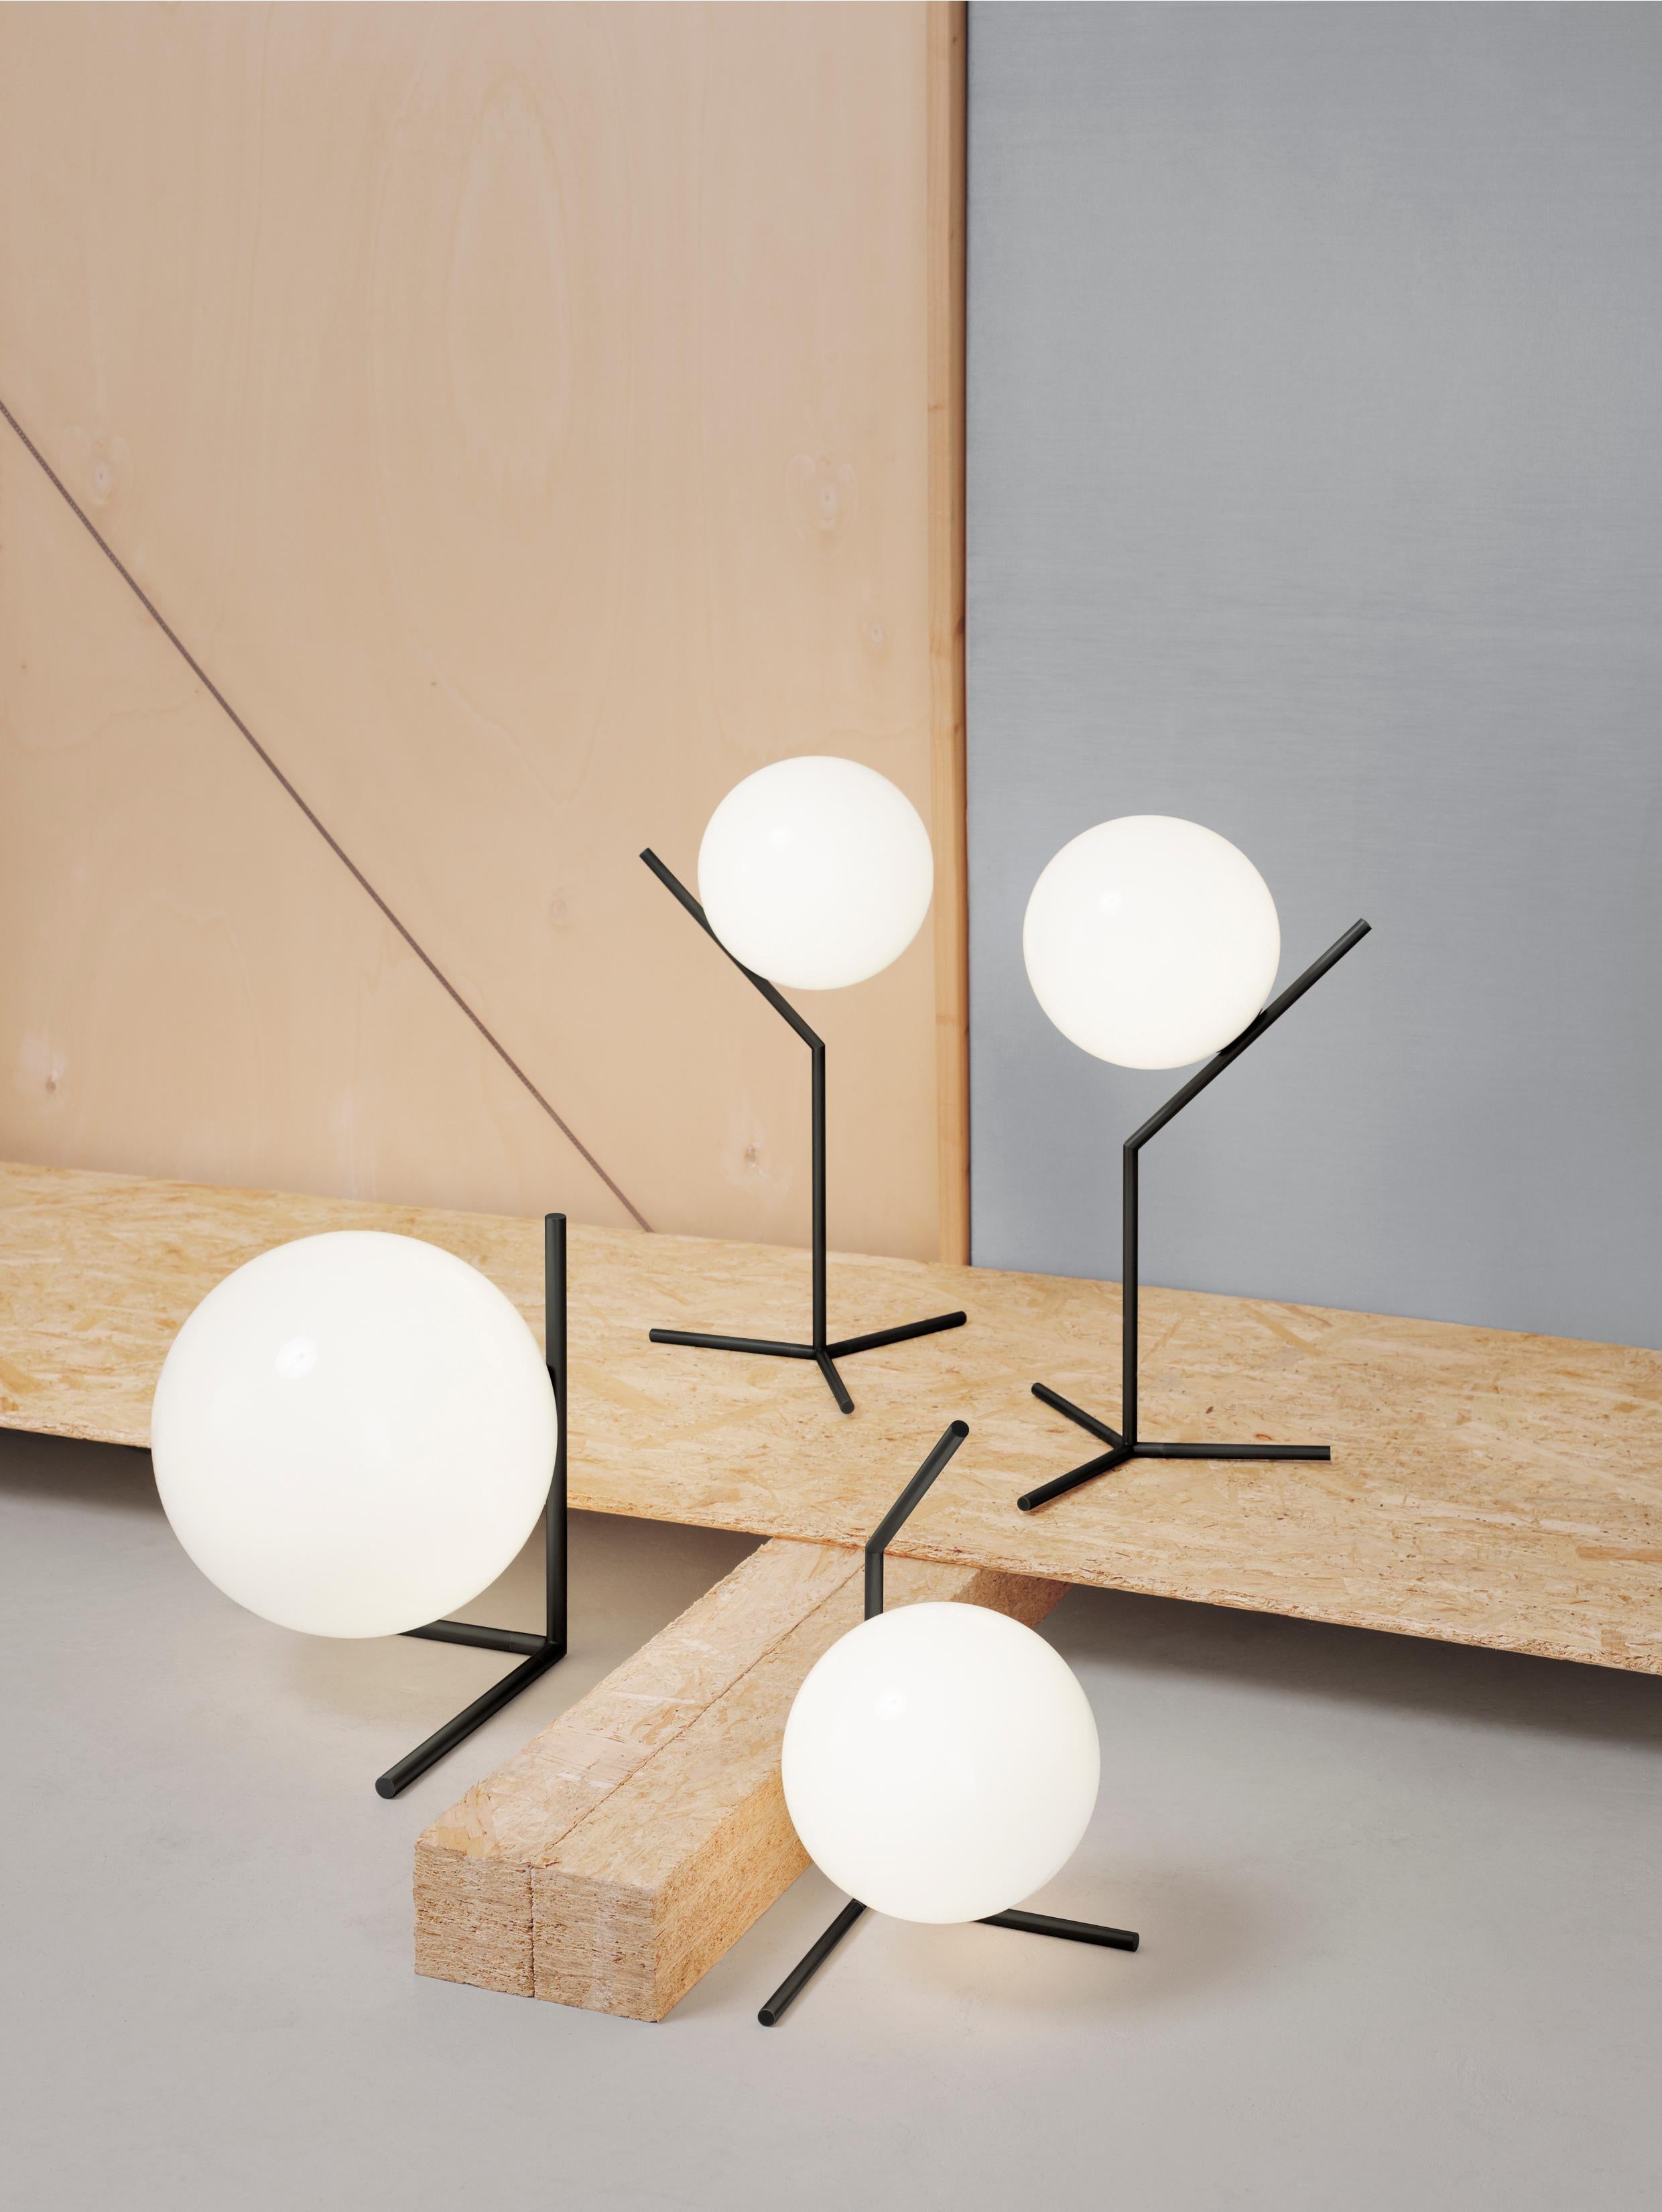 FLOS IC Lights T2 Table Lamp in Black by Michael Anastassiades

Like the other pieces in his IC Light Series, the IC Lights T balances designer Michael Anastassiades’ love of industrial simplicity with intricate symbolism. It provides diffused light